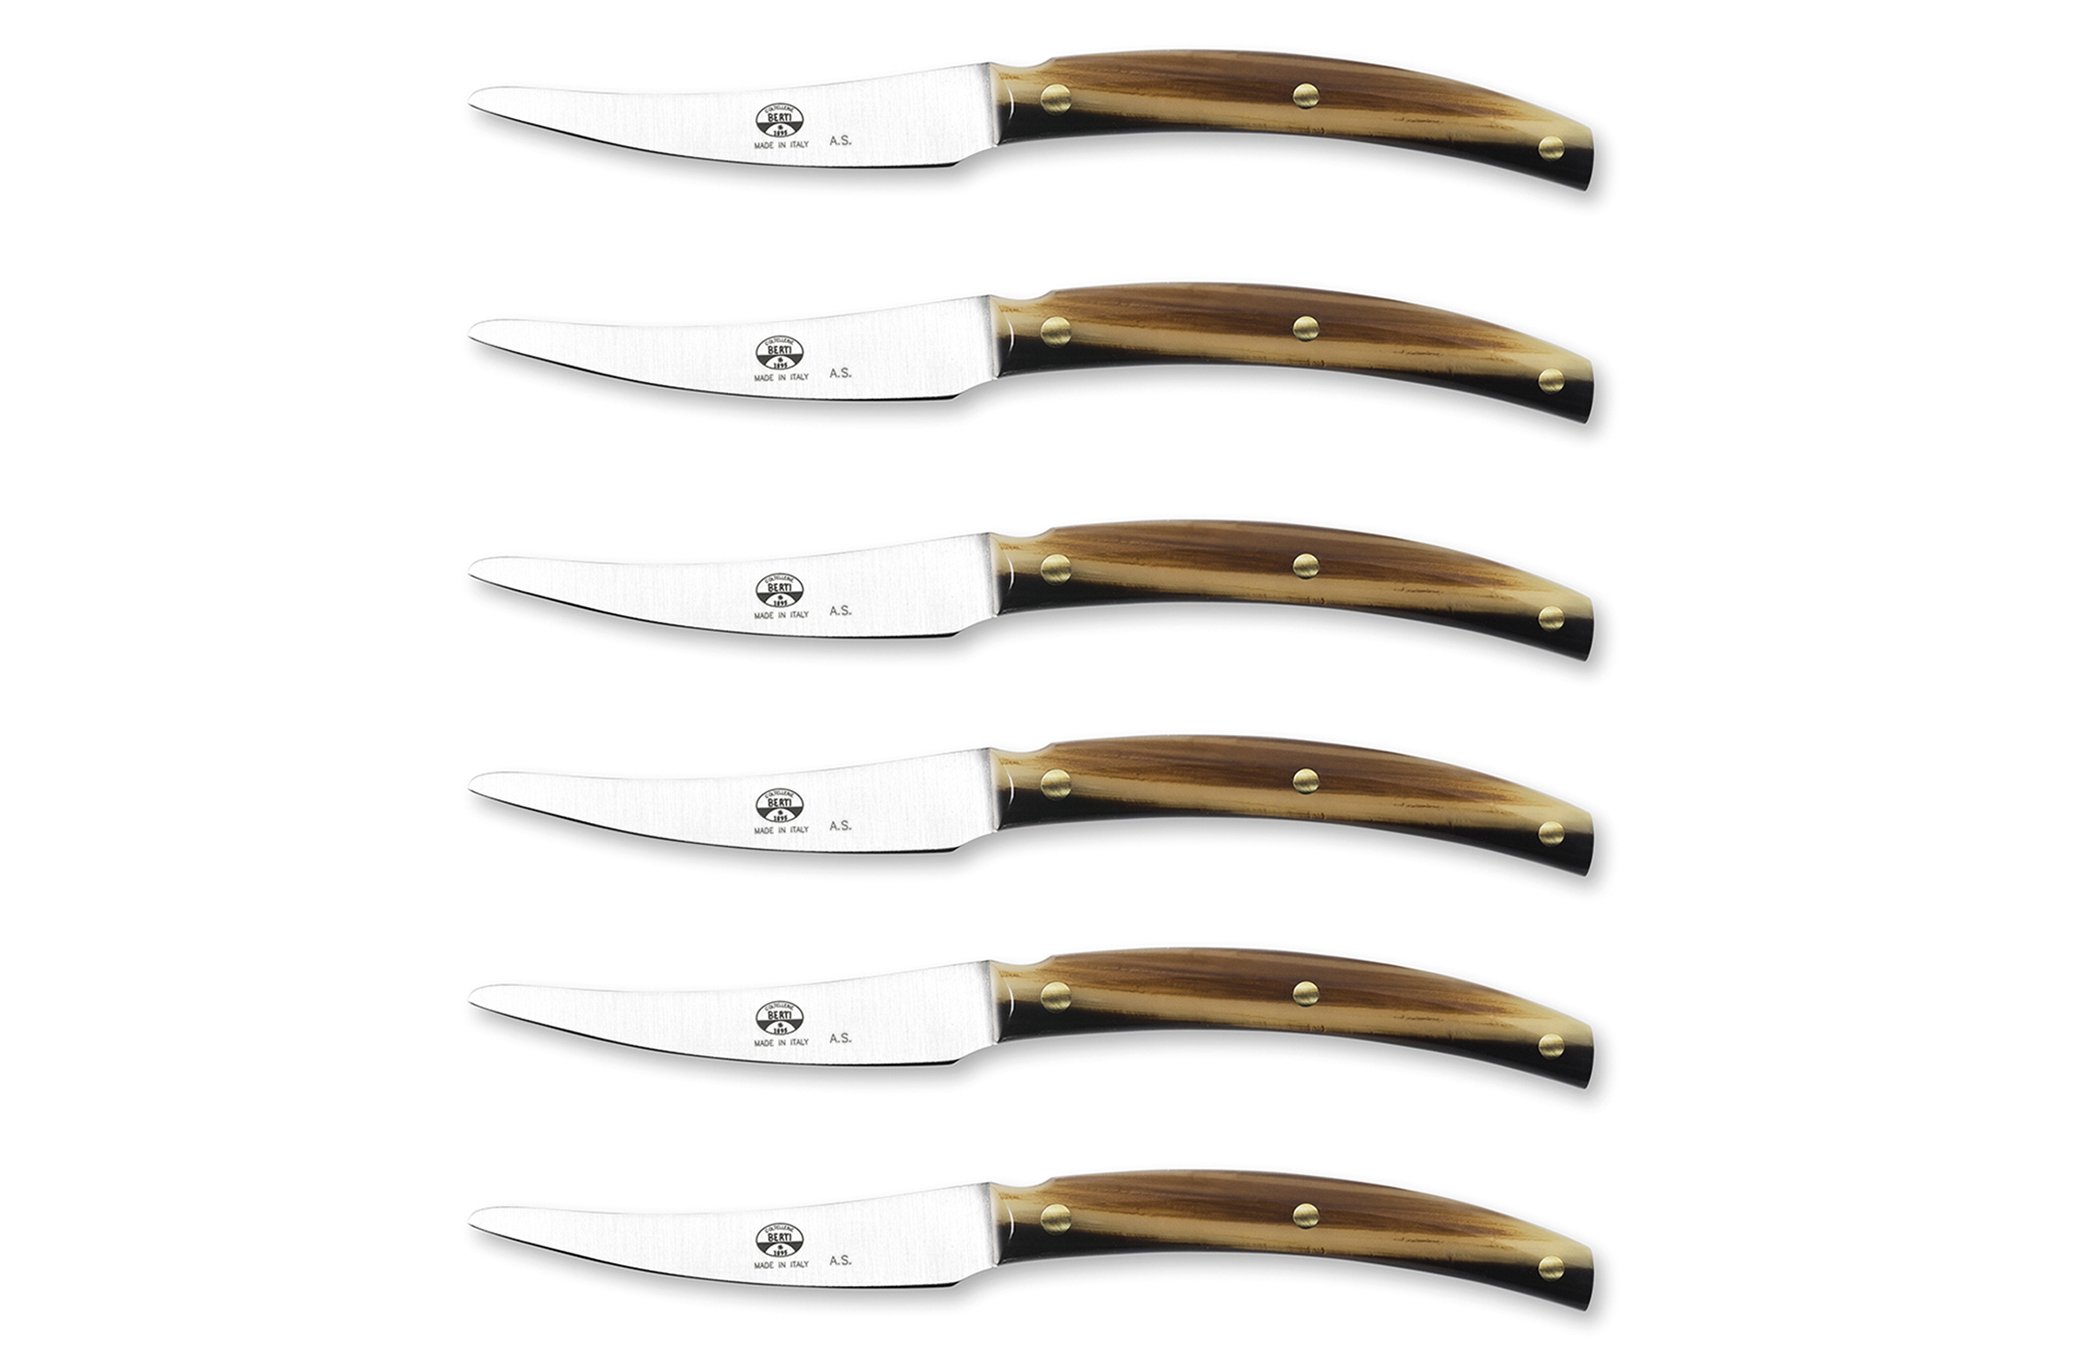 Kit 6 Table Knives “Convivo” – Handcrafted Knives